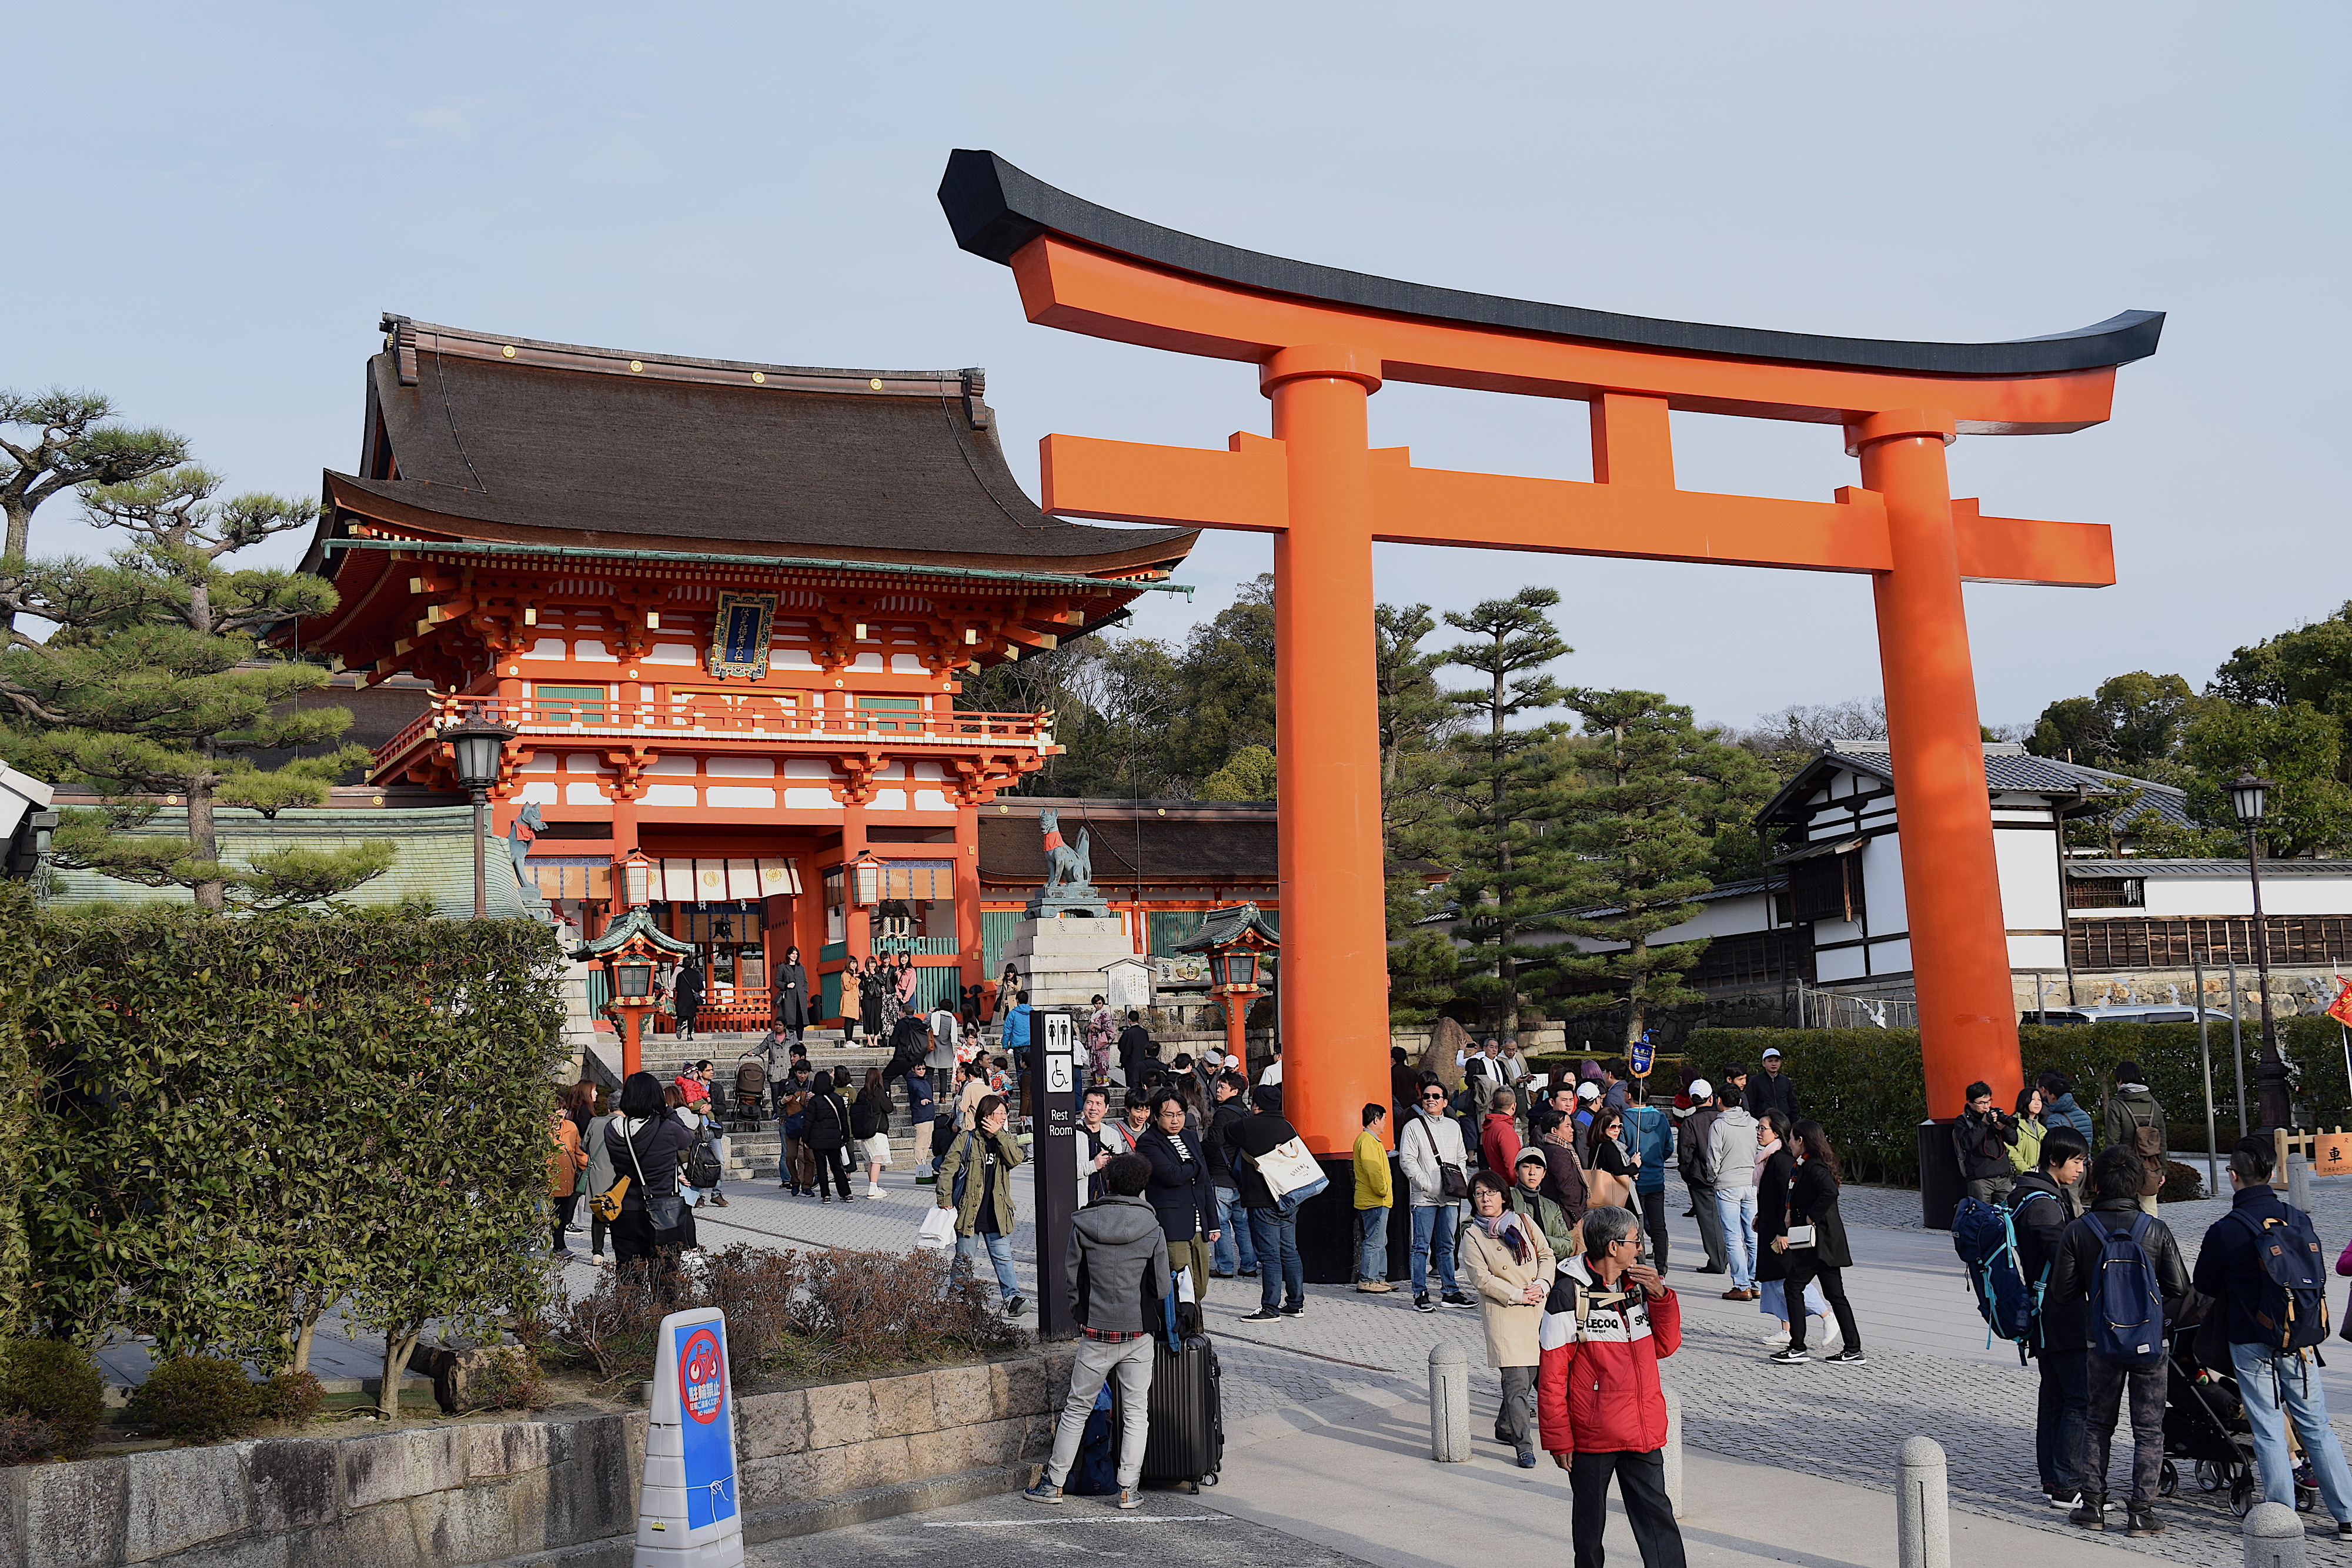 The Fushimi Inari Shrine is the largest shrine. It is famous for the large number of red gates (torii) at the site. Further described in text.